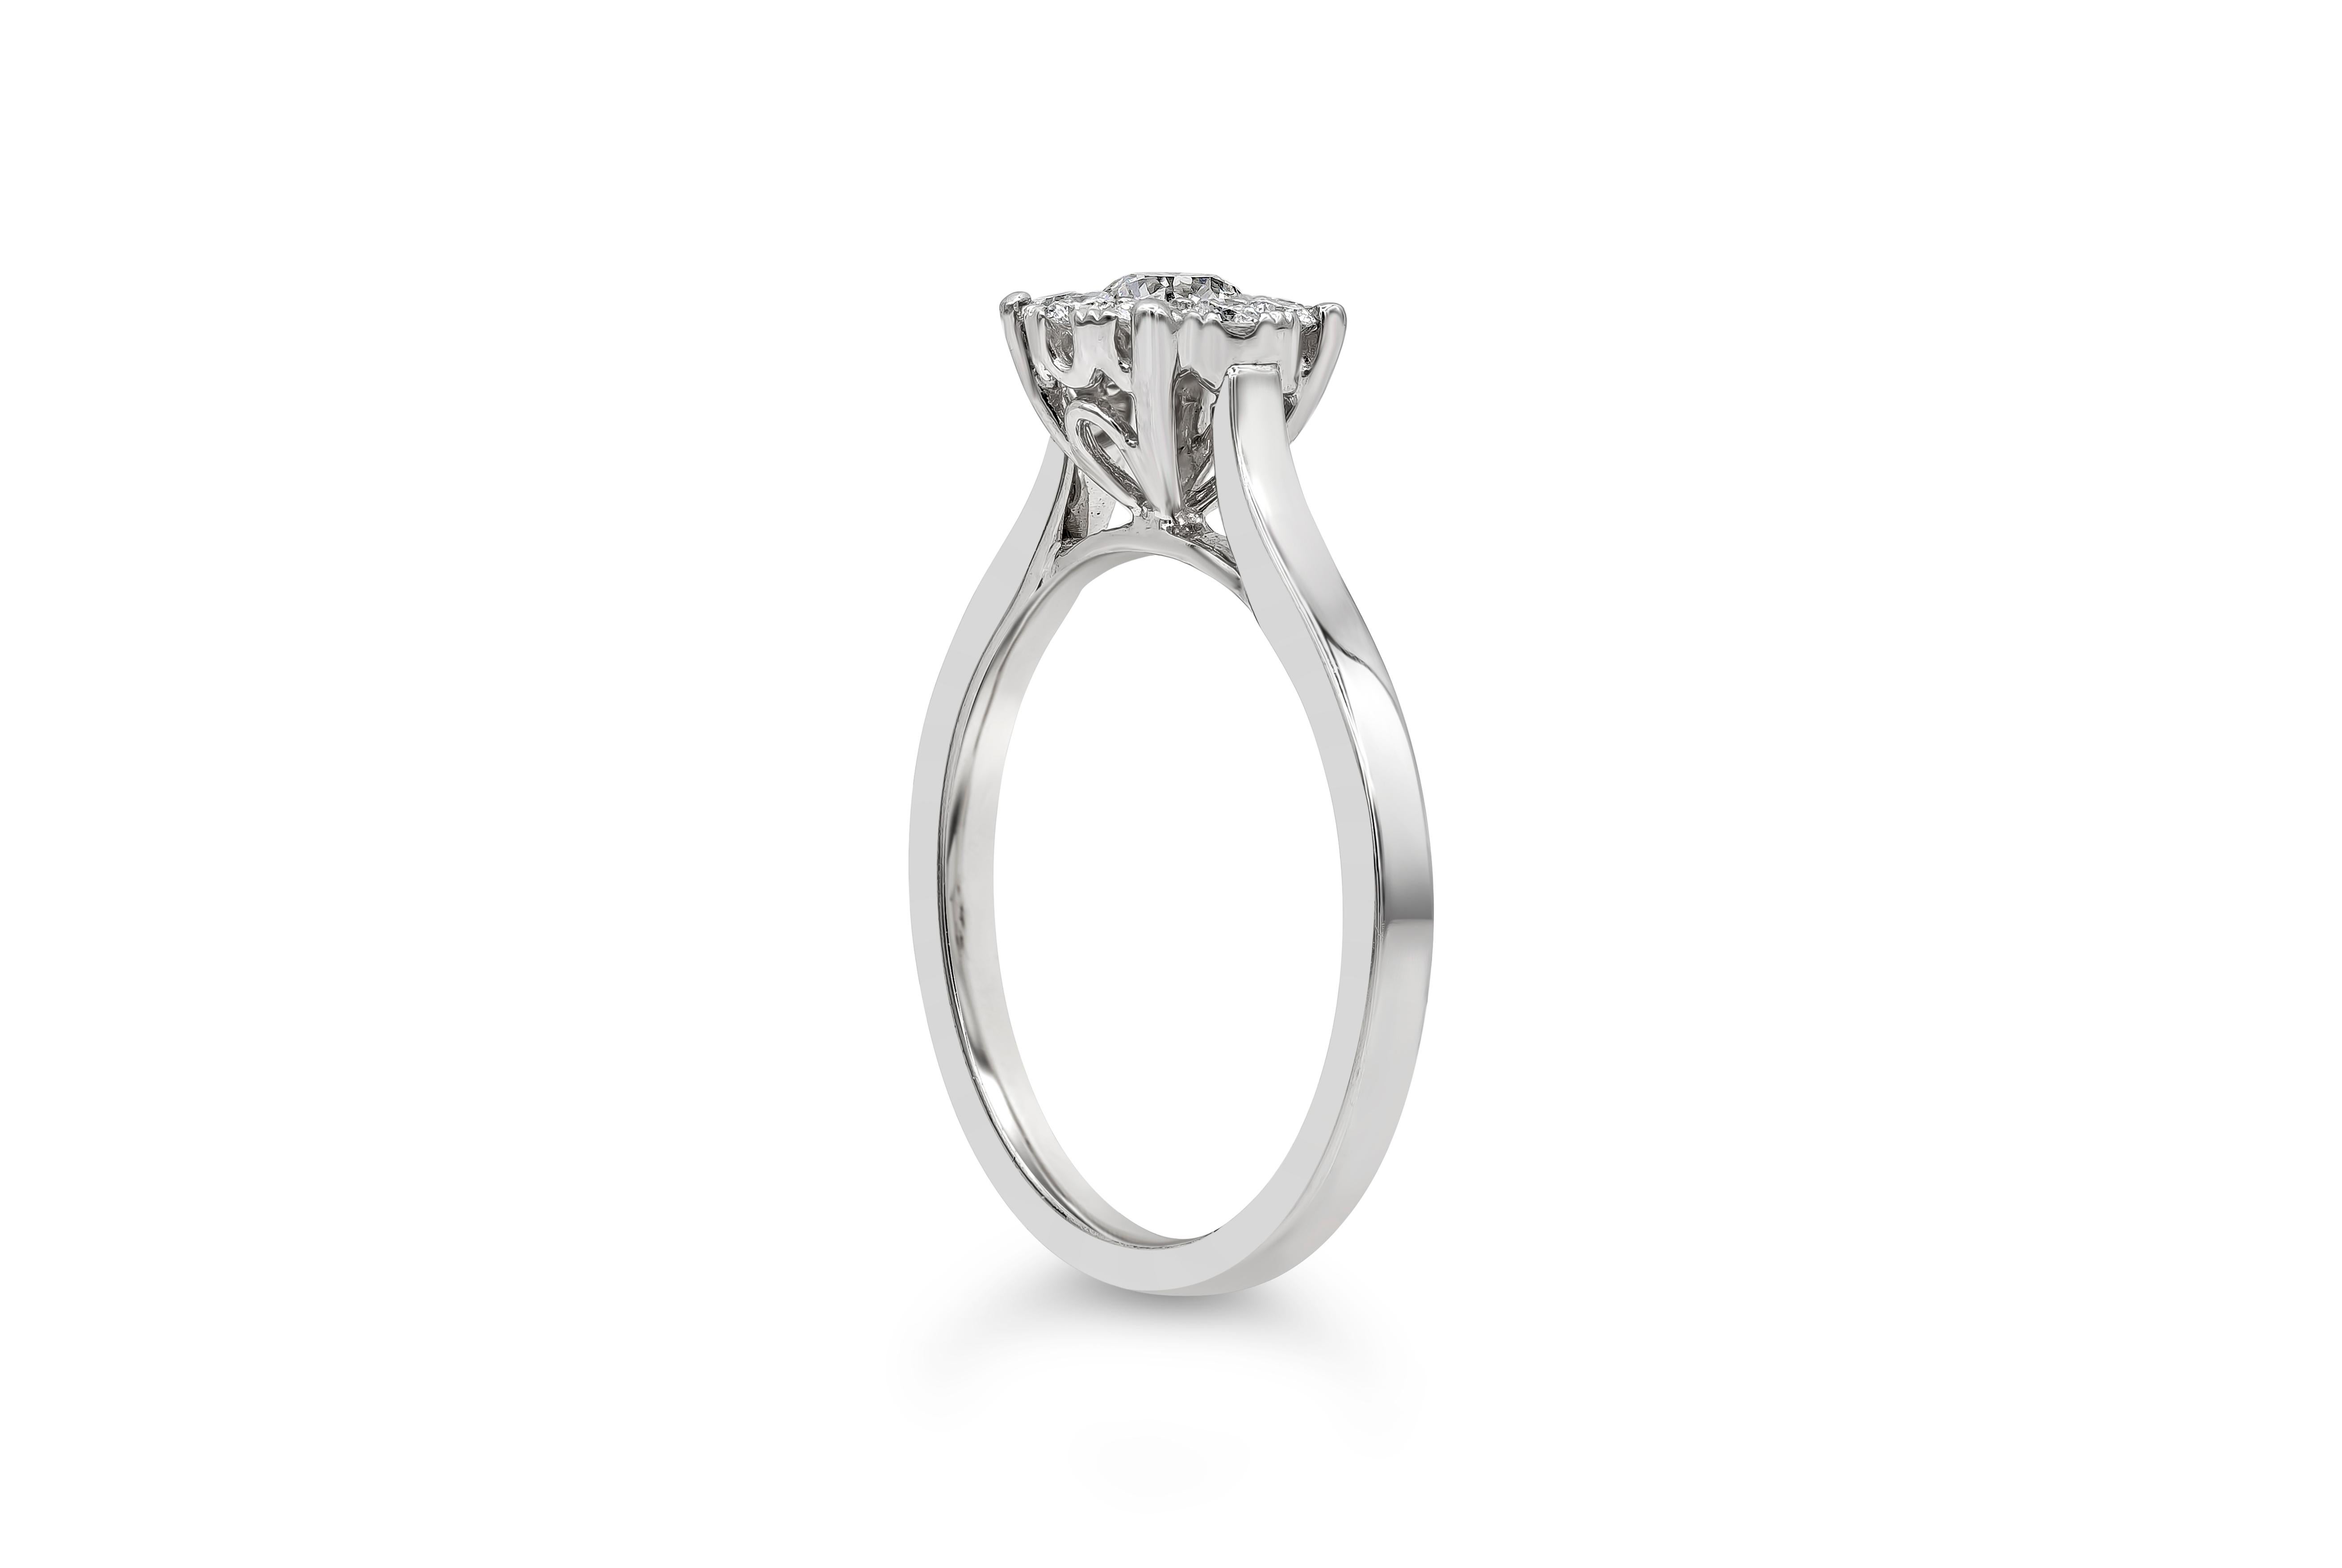 A unique solitaire engagement ring style showcasing a cluster of round brilliant diamonds making it look like one large center diamond, set in a classic four prong setting. Diamonds weigh 0.45 carats total. Finely made in 18K white gold. Size 6.5 US